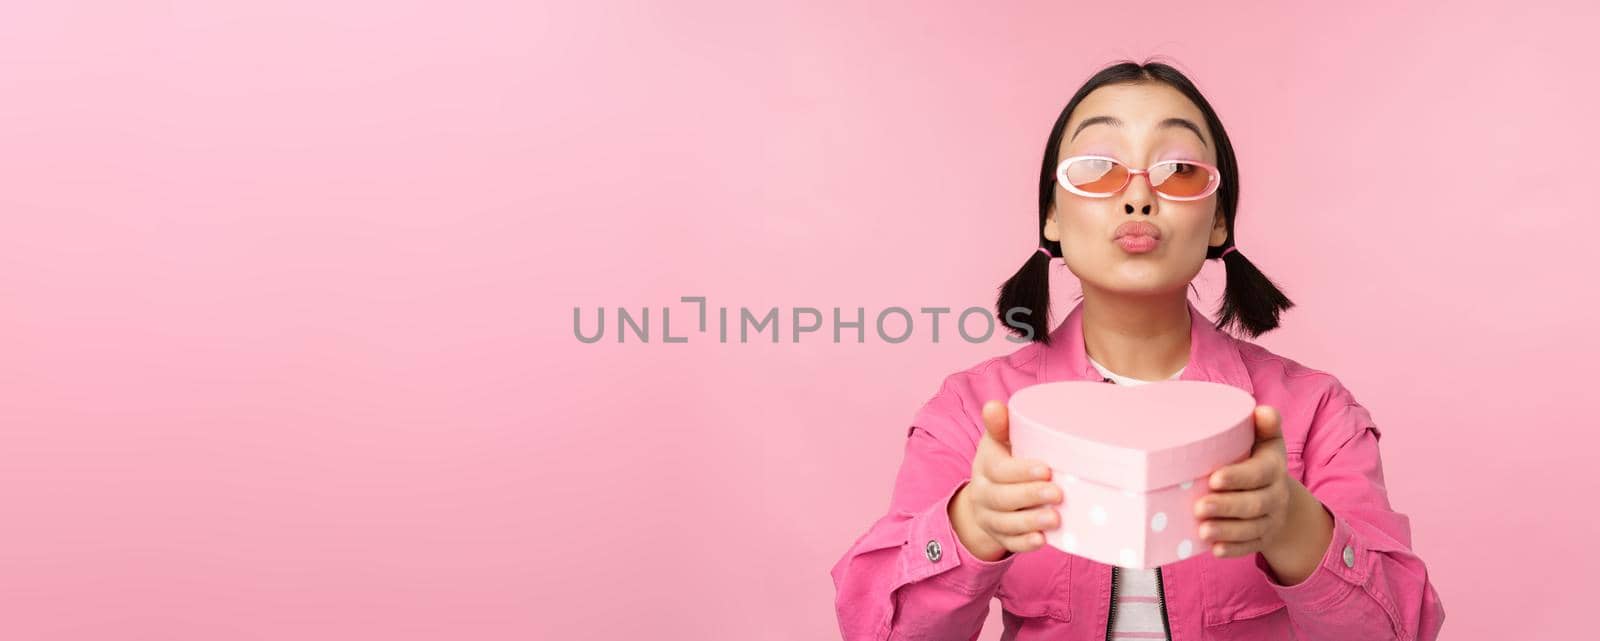 Cute asian girl giving you gift in heart shaped box, kissing and smiling, concept of holiday and celebration, standing over pink background by Benzoix